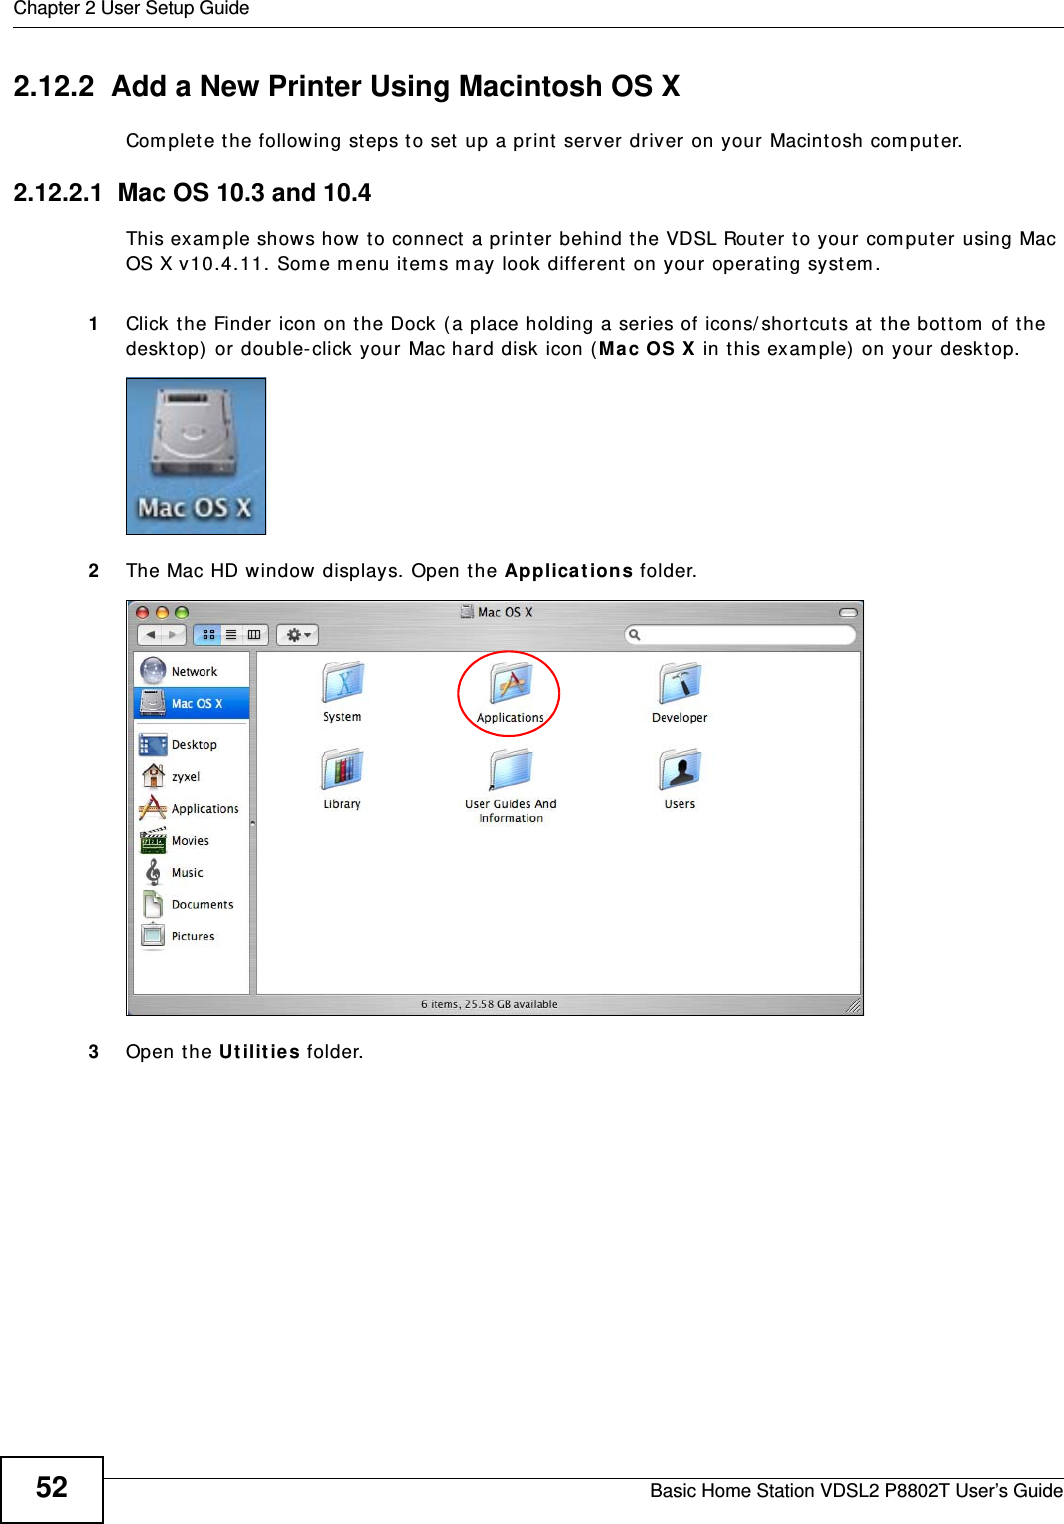 Chapter 2 User Setup GuideBasic Home Station VDSL2 P8802T User’s Guide522.12.2  Add a New Printer Using Macintosh OS XCom plet e t he following st eps t o set up a print server driver on your Macintosh com puter.2.12.2.1  Mac OS 10.3 and 10.4This exam ple shows how to connect a printer behind the VDSL Router to your com put er using Mac OS X v10.4.11. Som e m enu it em s m ay look different  on your operat ing syst em .1Click the Finder icon on the Dock ( a place holding a ser ies of icons/ shortcut s at  the bot tom  of the desktop) or double-click your Mac hard disk icon ( Mac OS X in t his exam ple) on your desktop.2The Mac HD window displays. Open t he Applica t ions folder.    3Open the Ut ilit ie s folder.